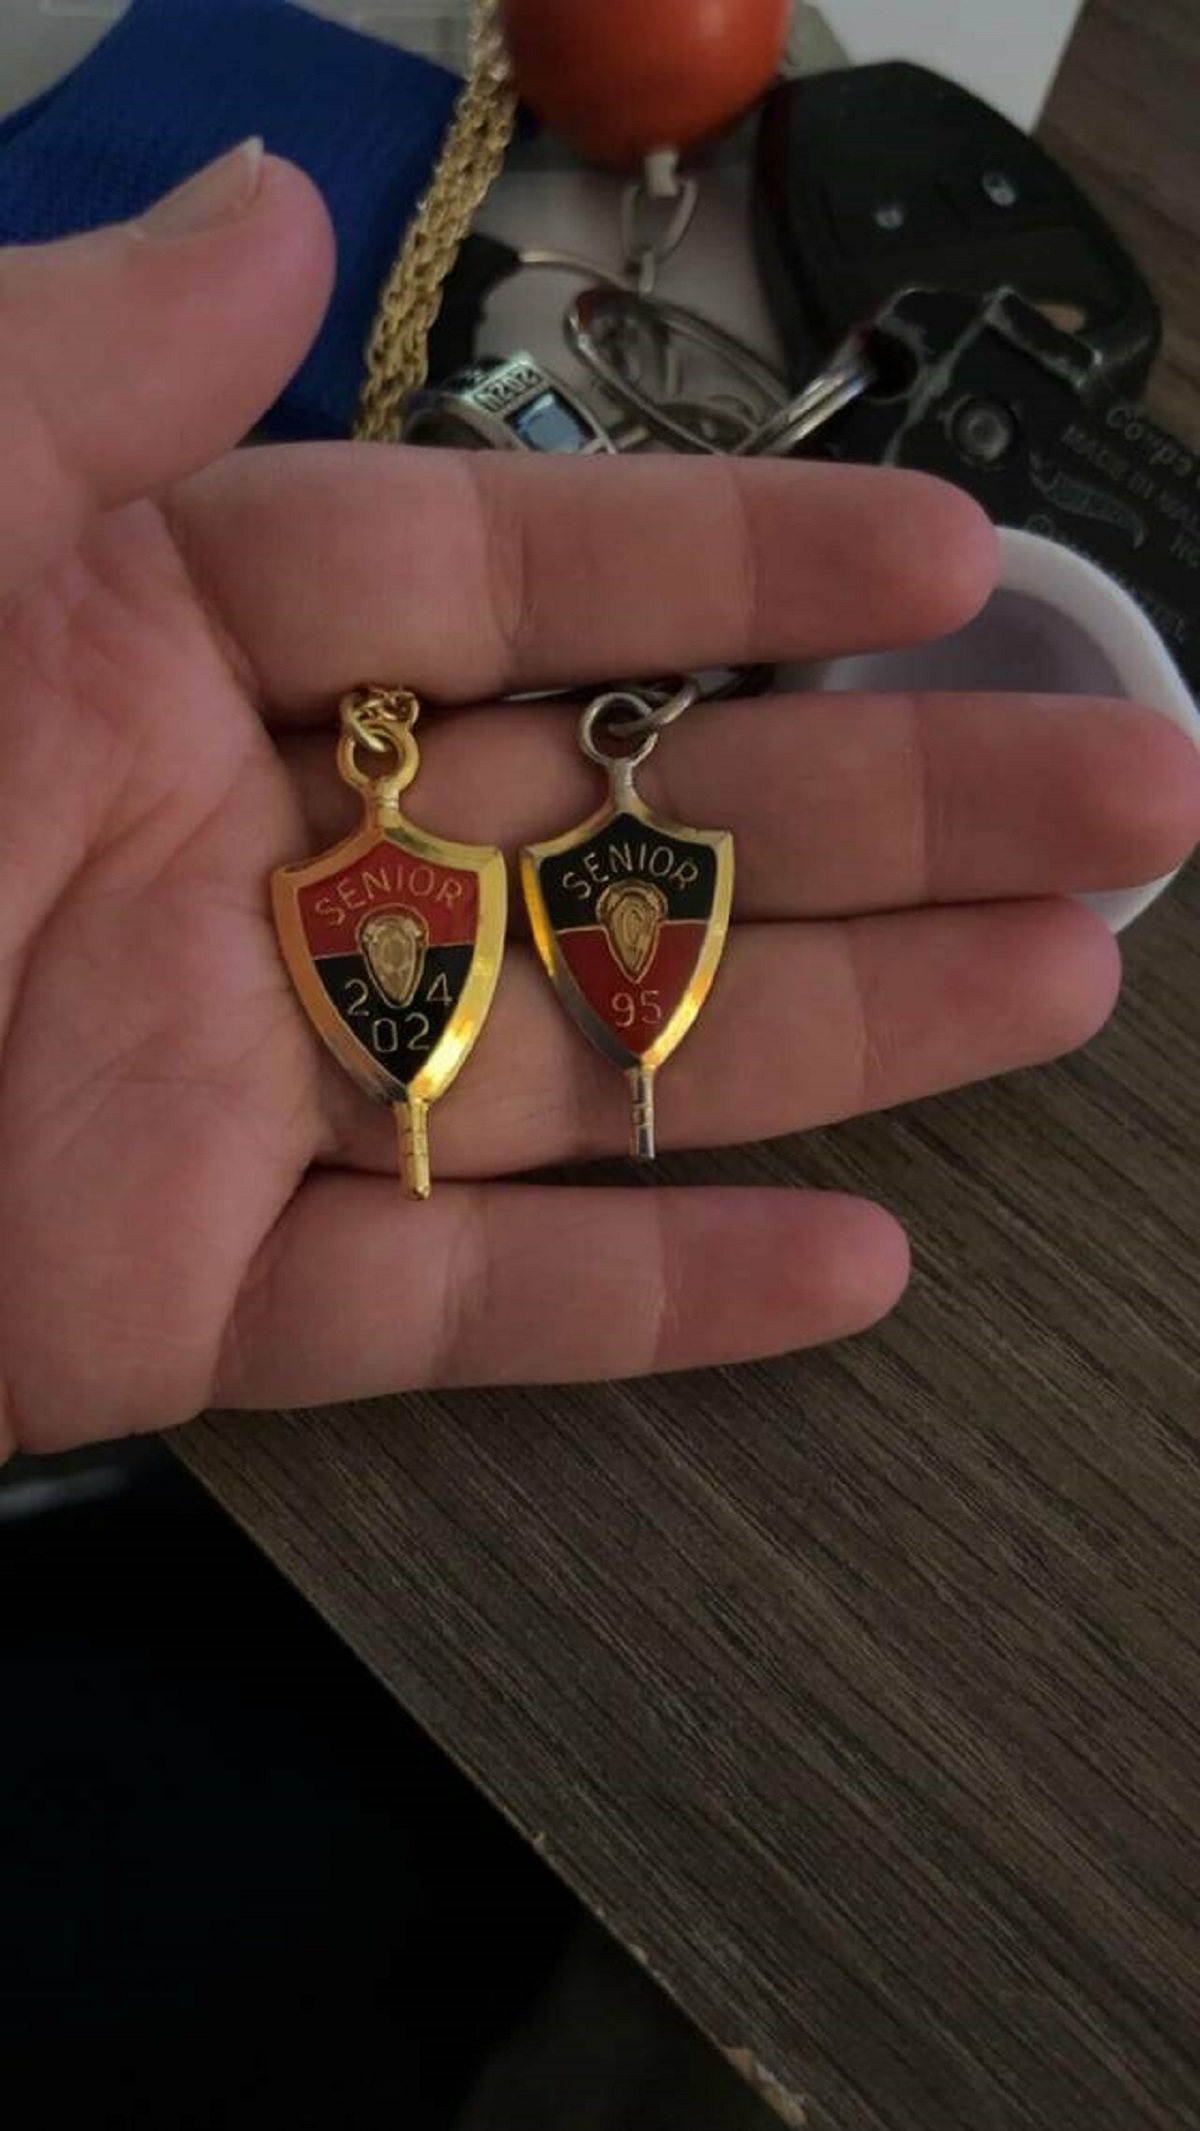 "Mine and my dads key necklace almost 20 years apart"